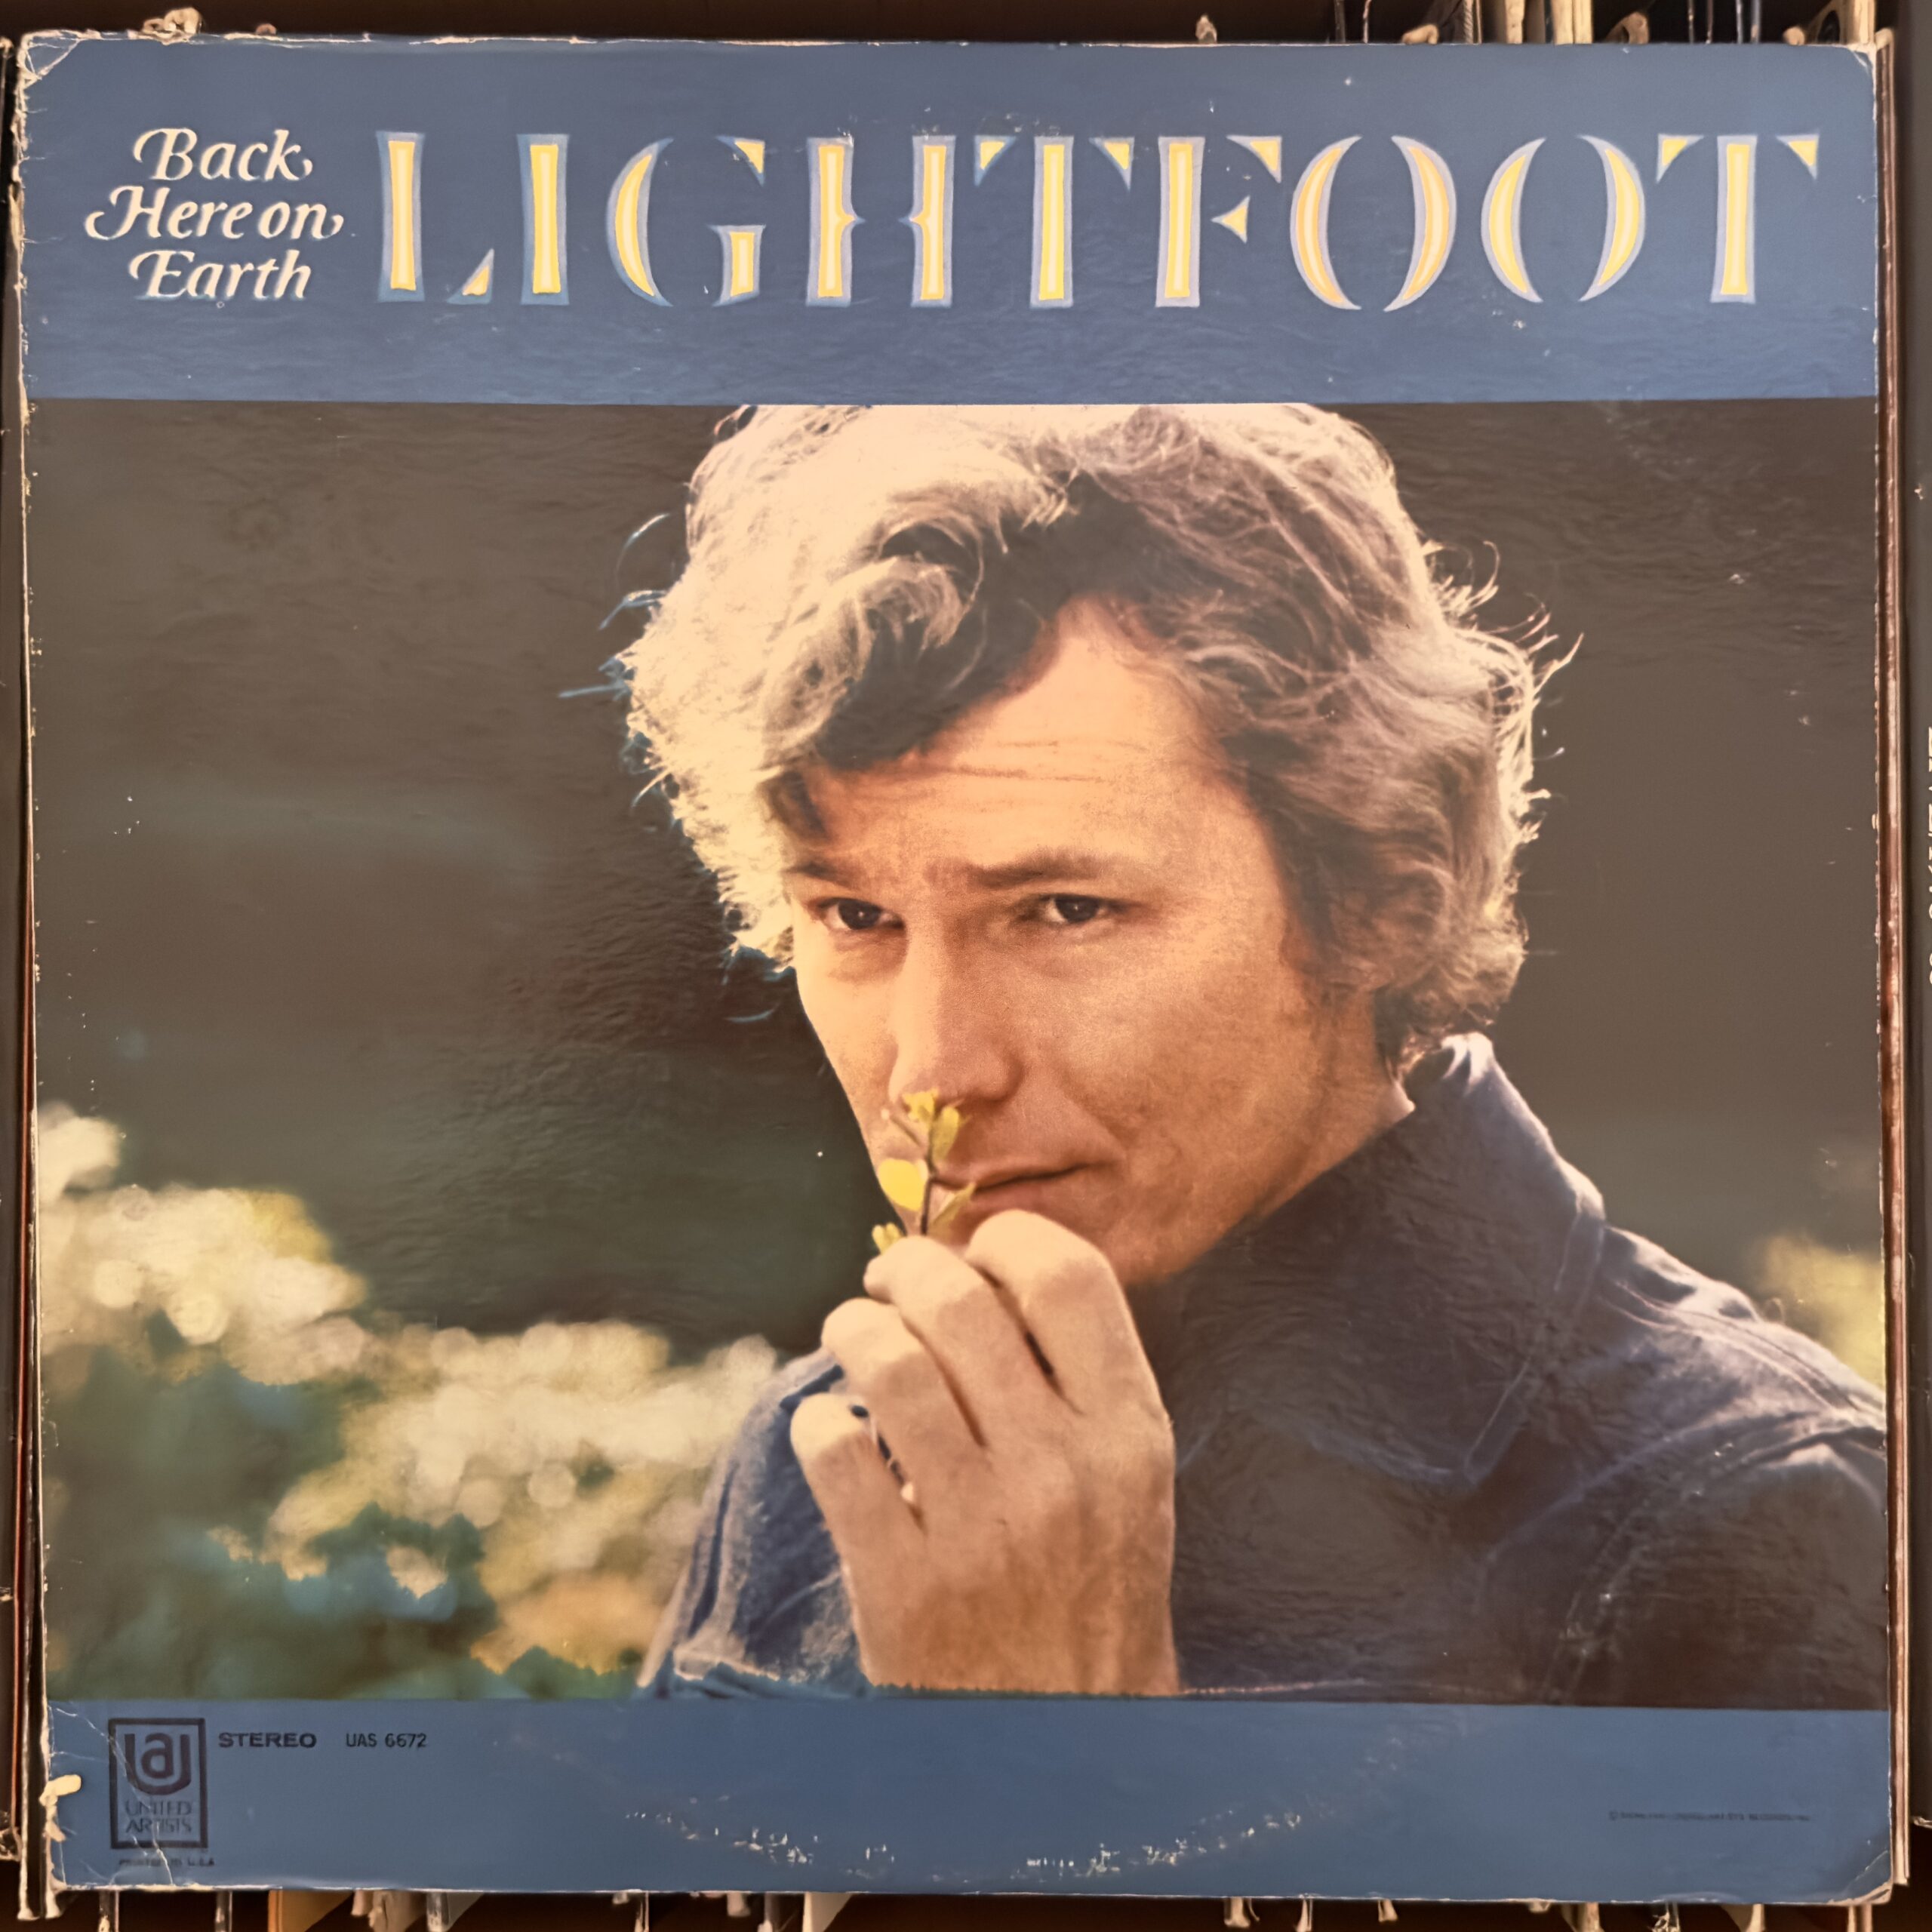 Back Here On Earth by Gordon Lightfoot